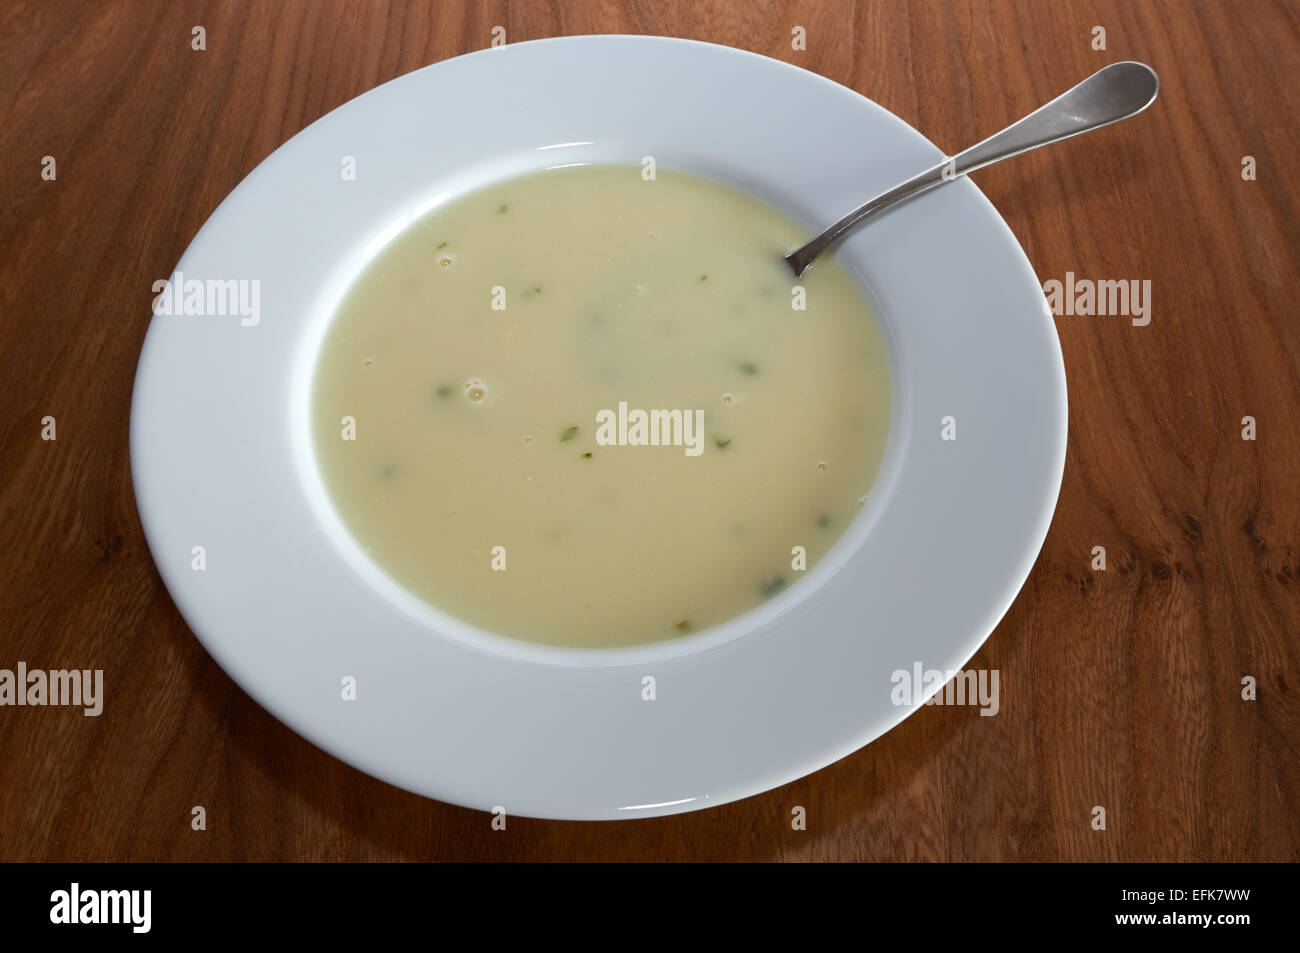 Spargel Suppe Stockfoto